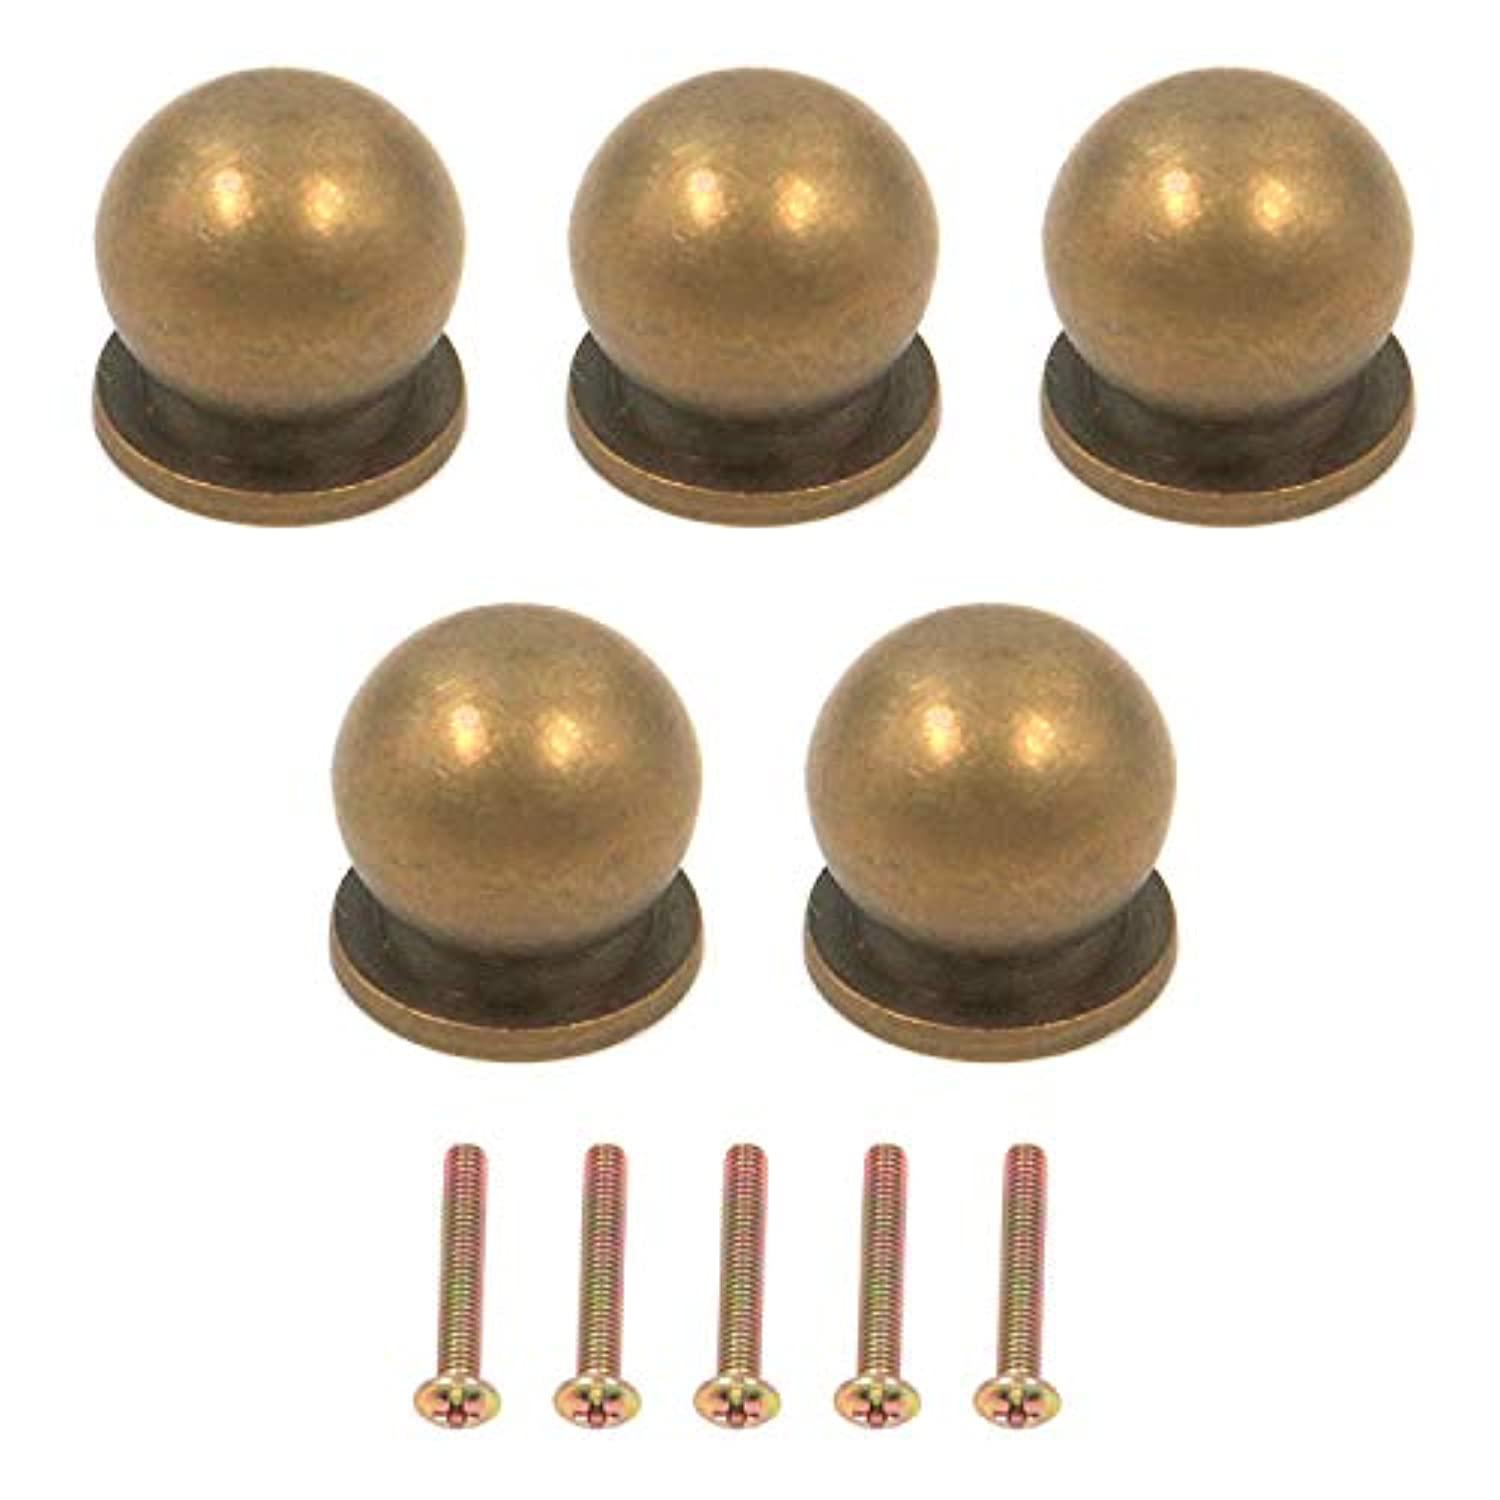 Mcredy knobs for dresser drawers mcredy brass knobs round 0.47" dia gold with mounting screws cabinet brass knobs and pulls pack of 